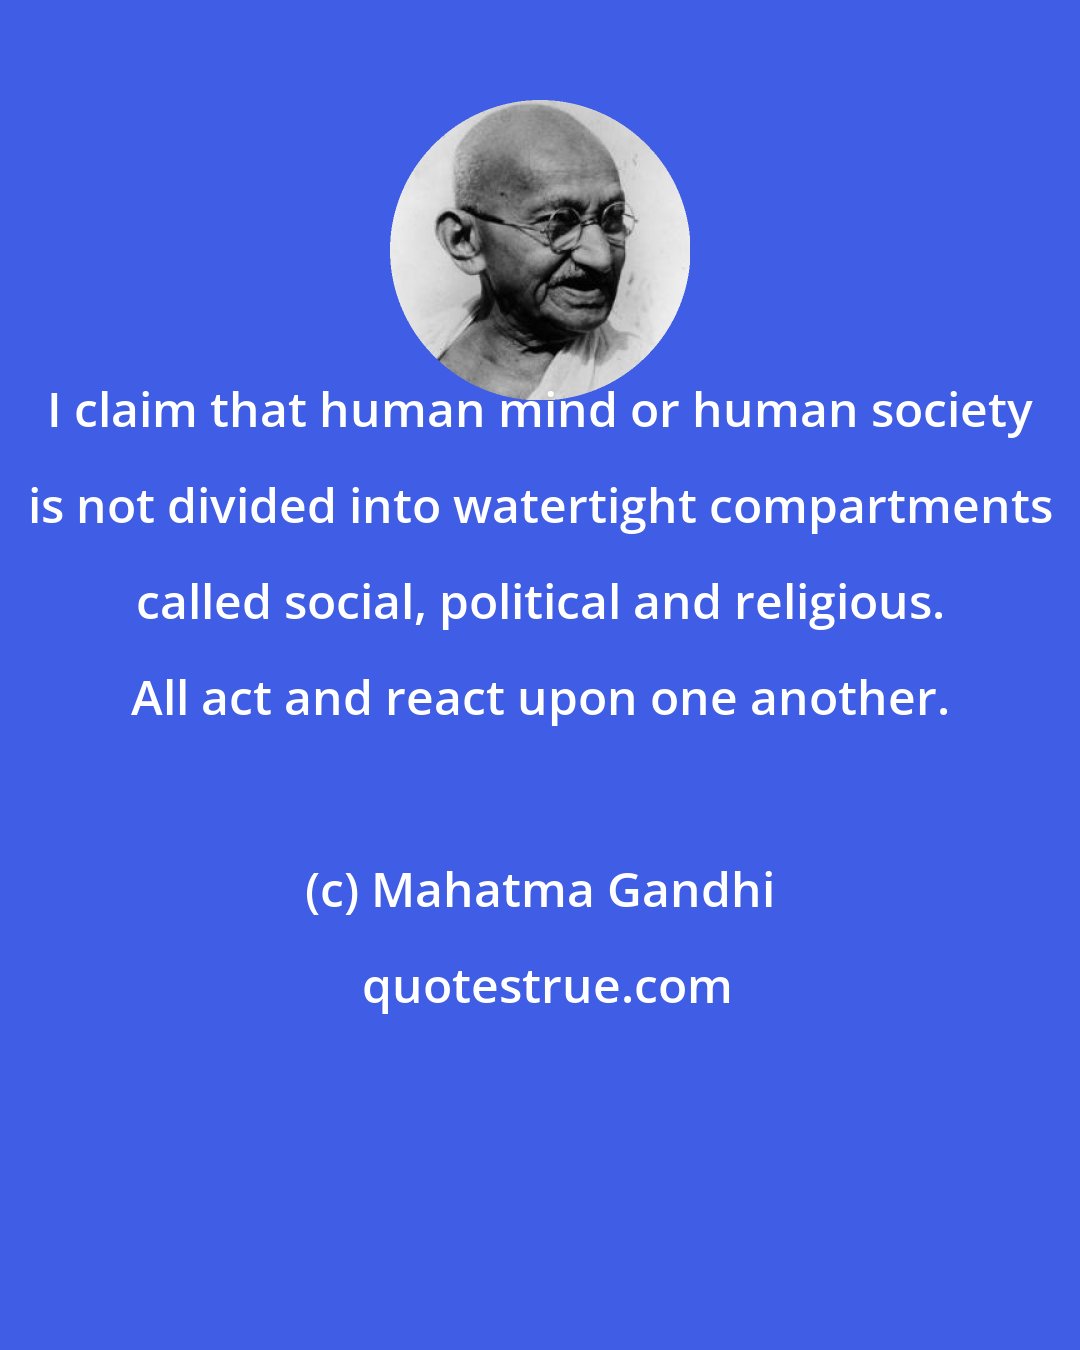 Mahatma Gandhi: I claim that human mind or human society is not divided into watertight compartments called social, political and religious. All act and react upon one another.